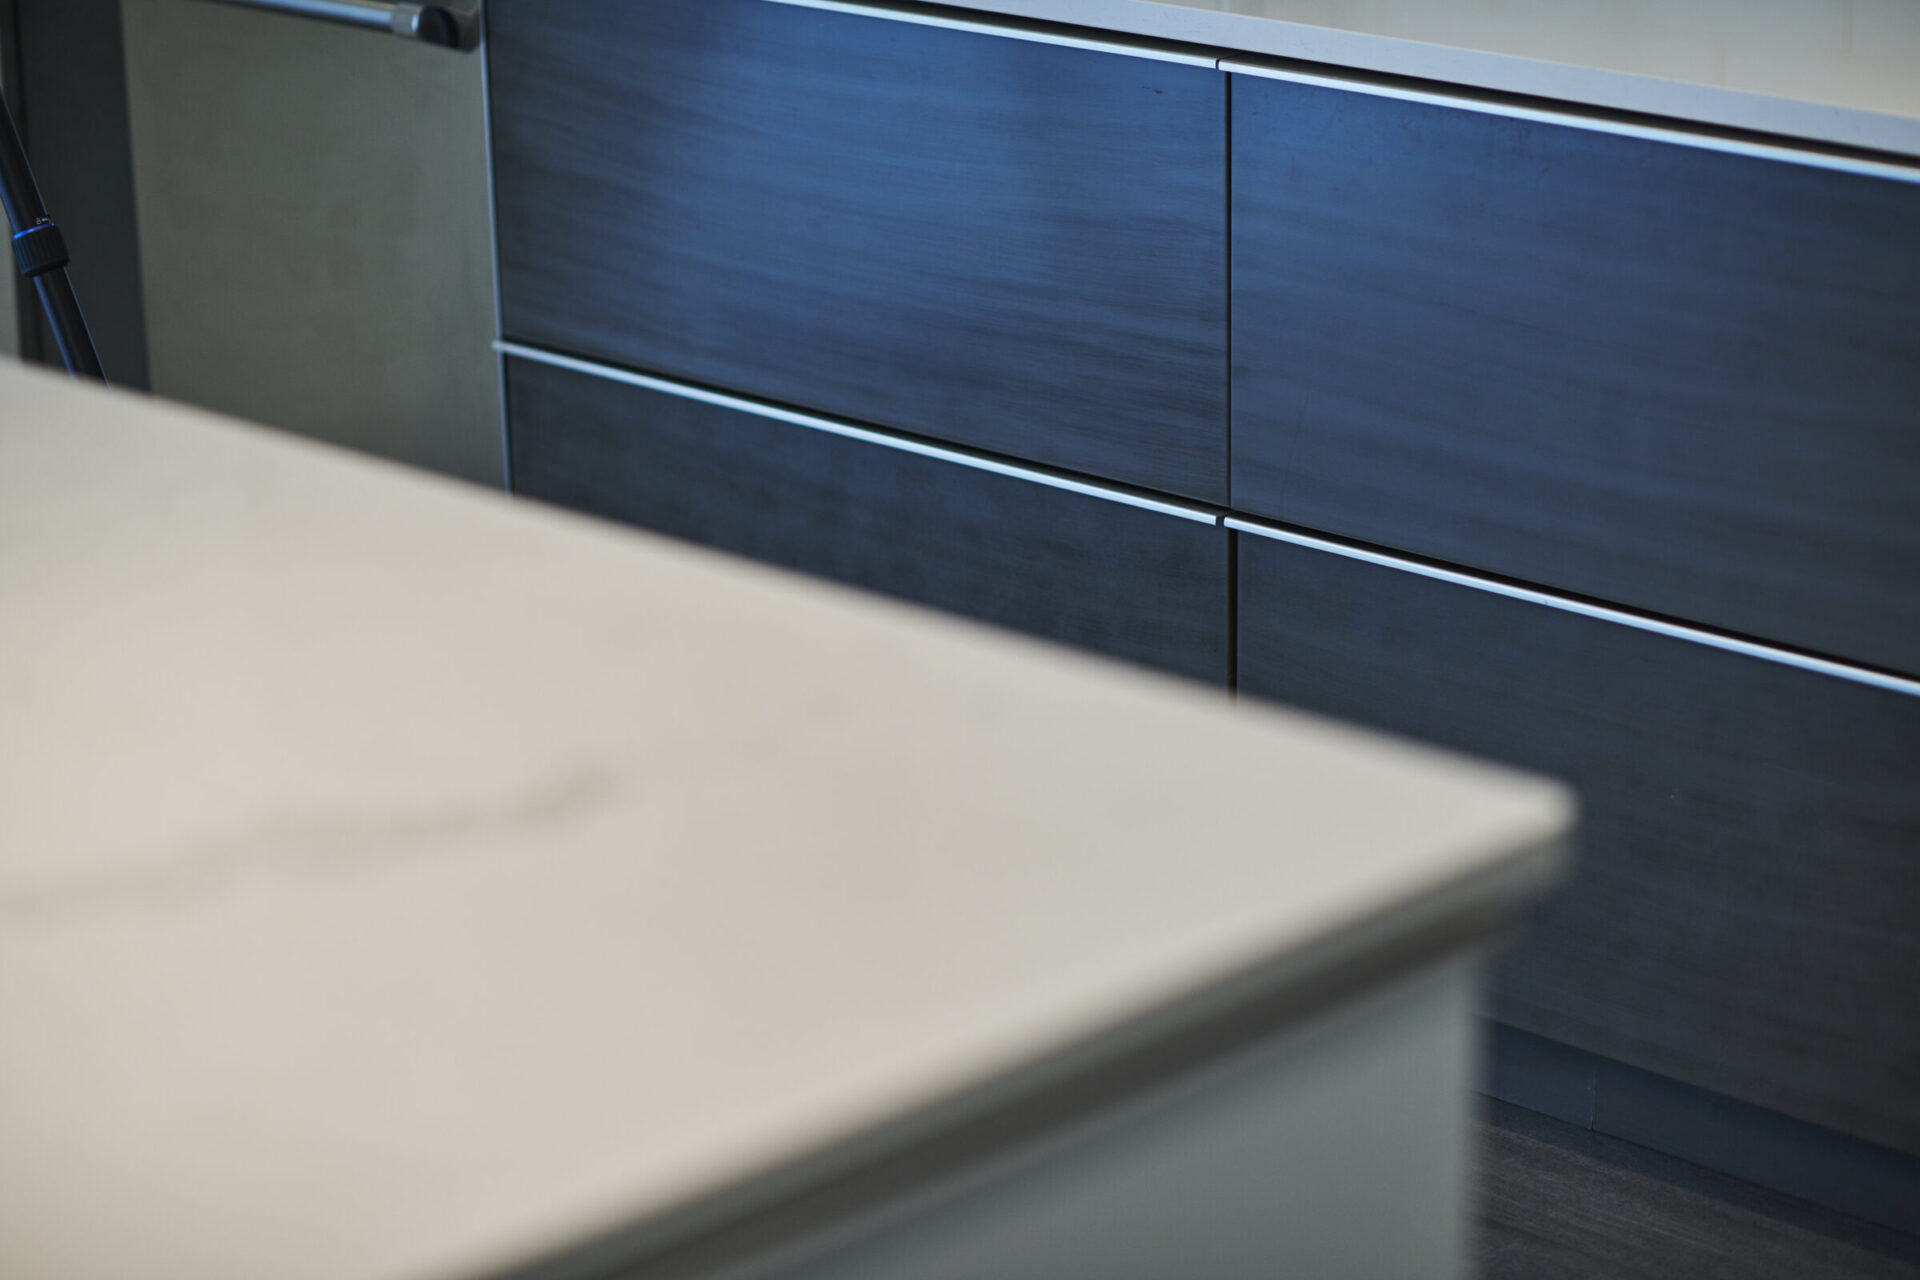 Close-up, angled view of a modern kitchen showing a corner of a beige countertop with sleek, dark cabinetry and silver handles in the background.